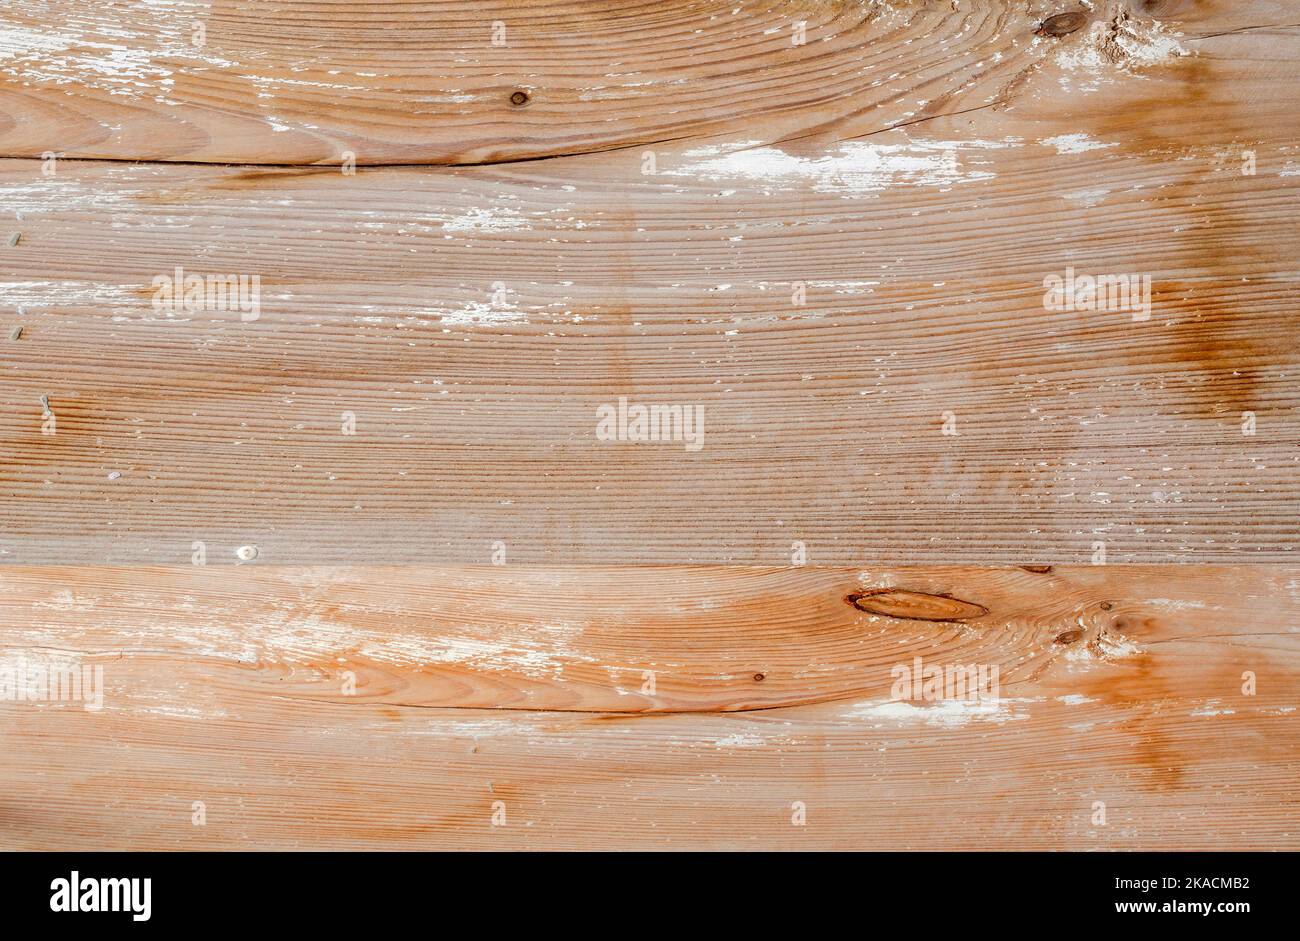 pine boards, texture of old natural wood shaded white in a rustic style from close range, wallpaper, background for graphic designs, flat lay Stock Photo